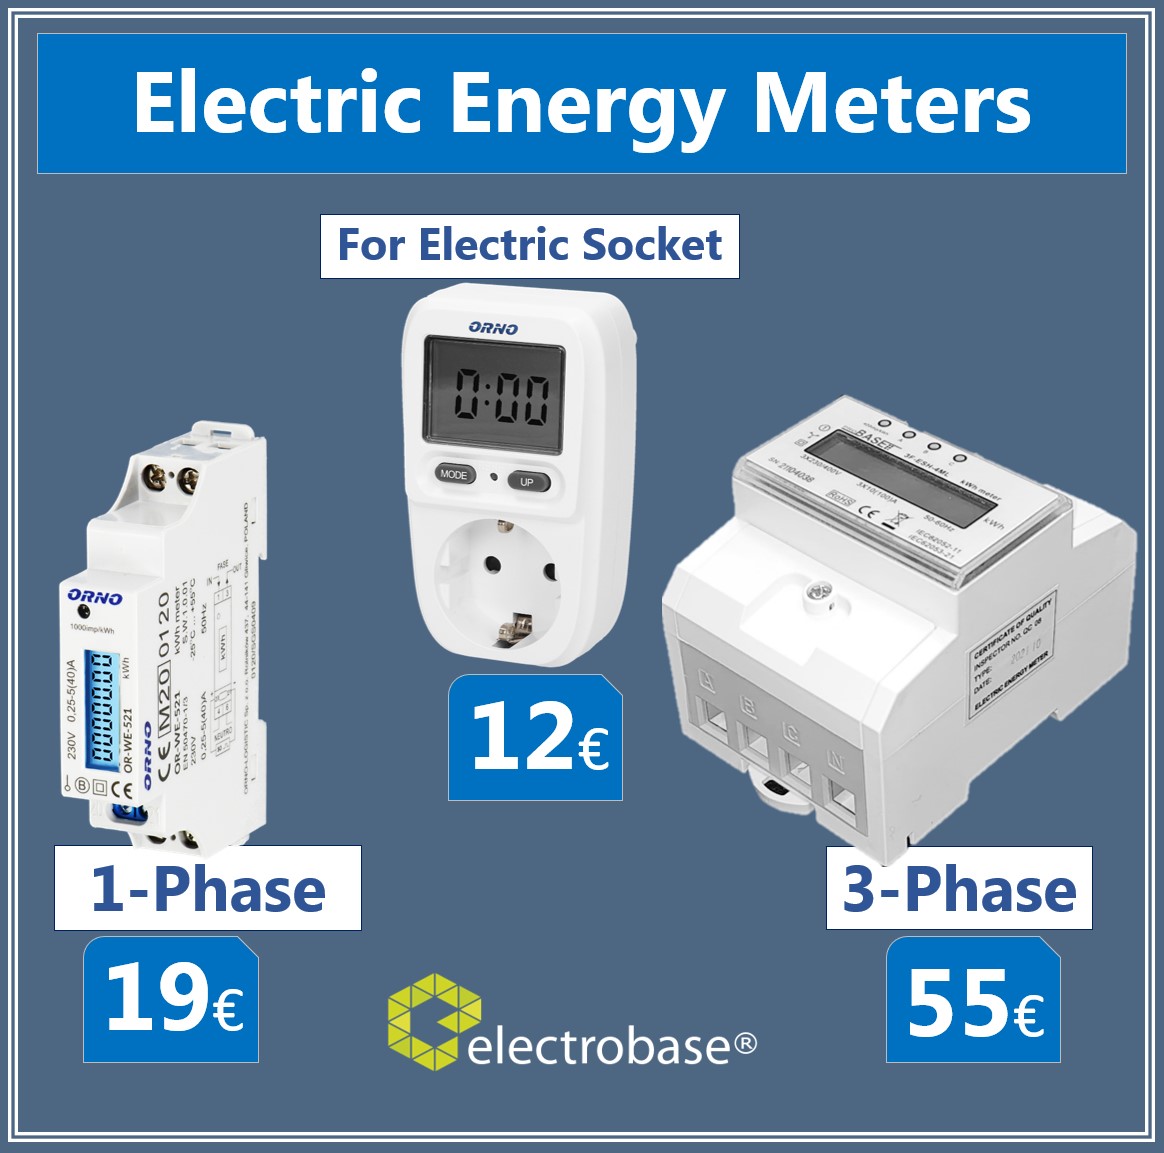 ⚡Controls Electricity consumption in each Room⚡